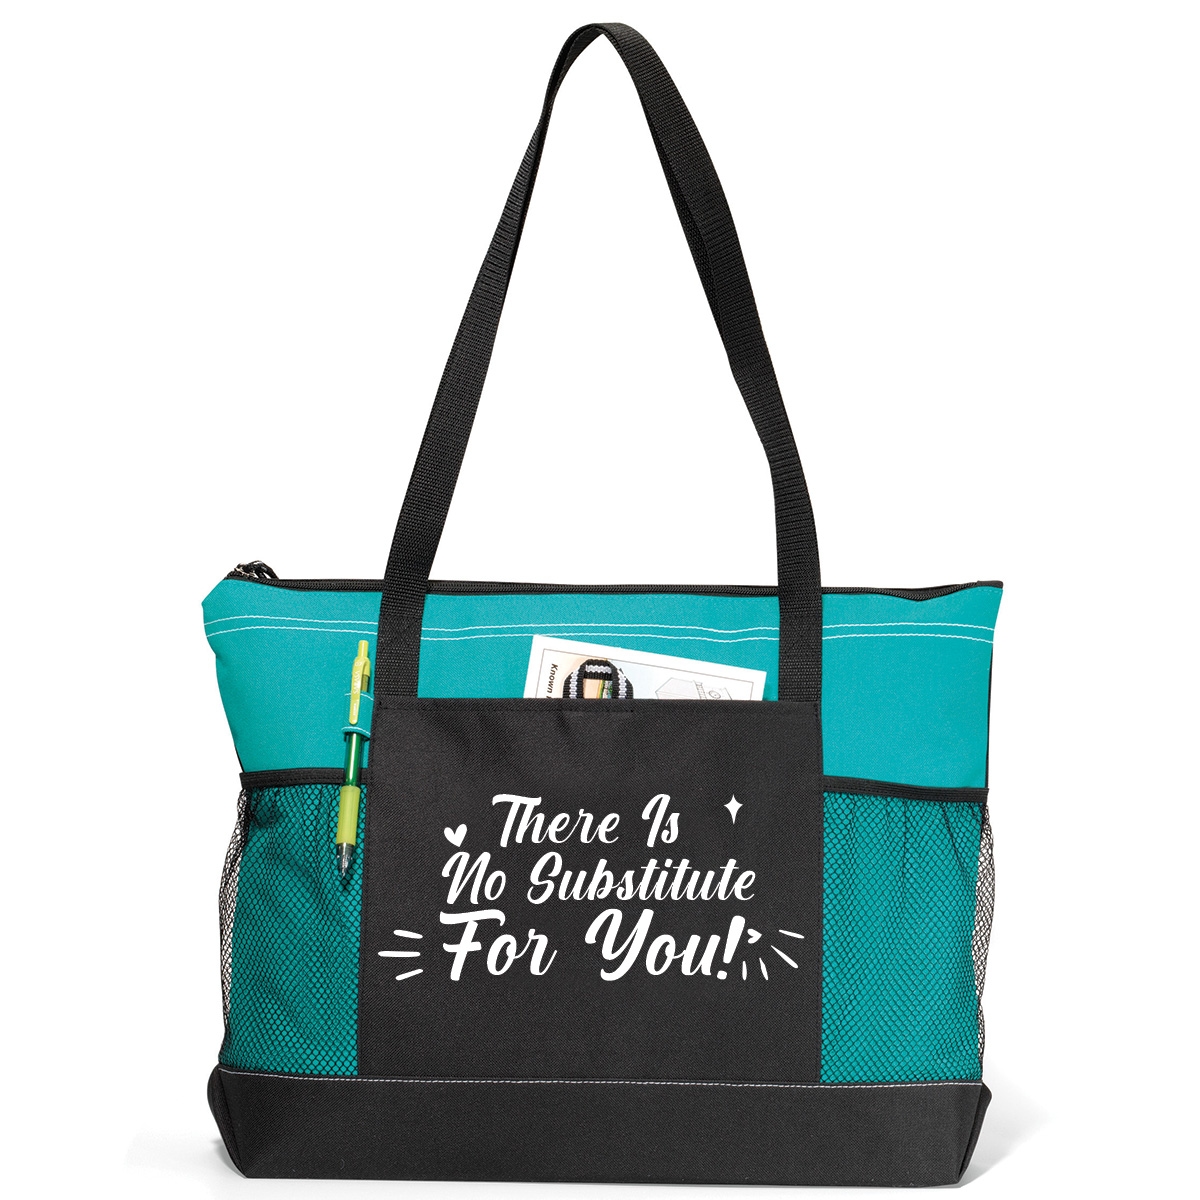 Teal tote bag with teacher appreciation saying